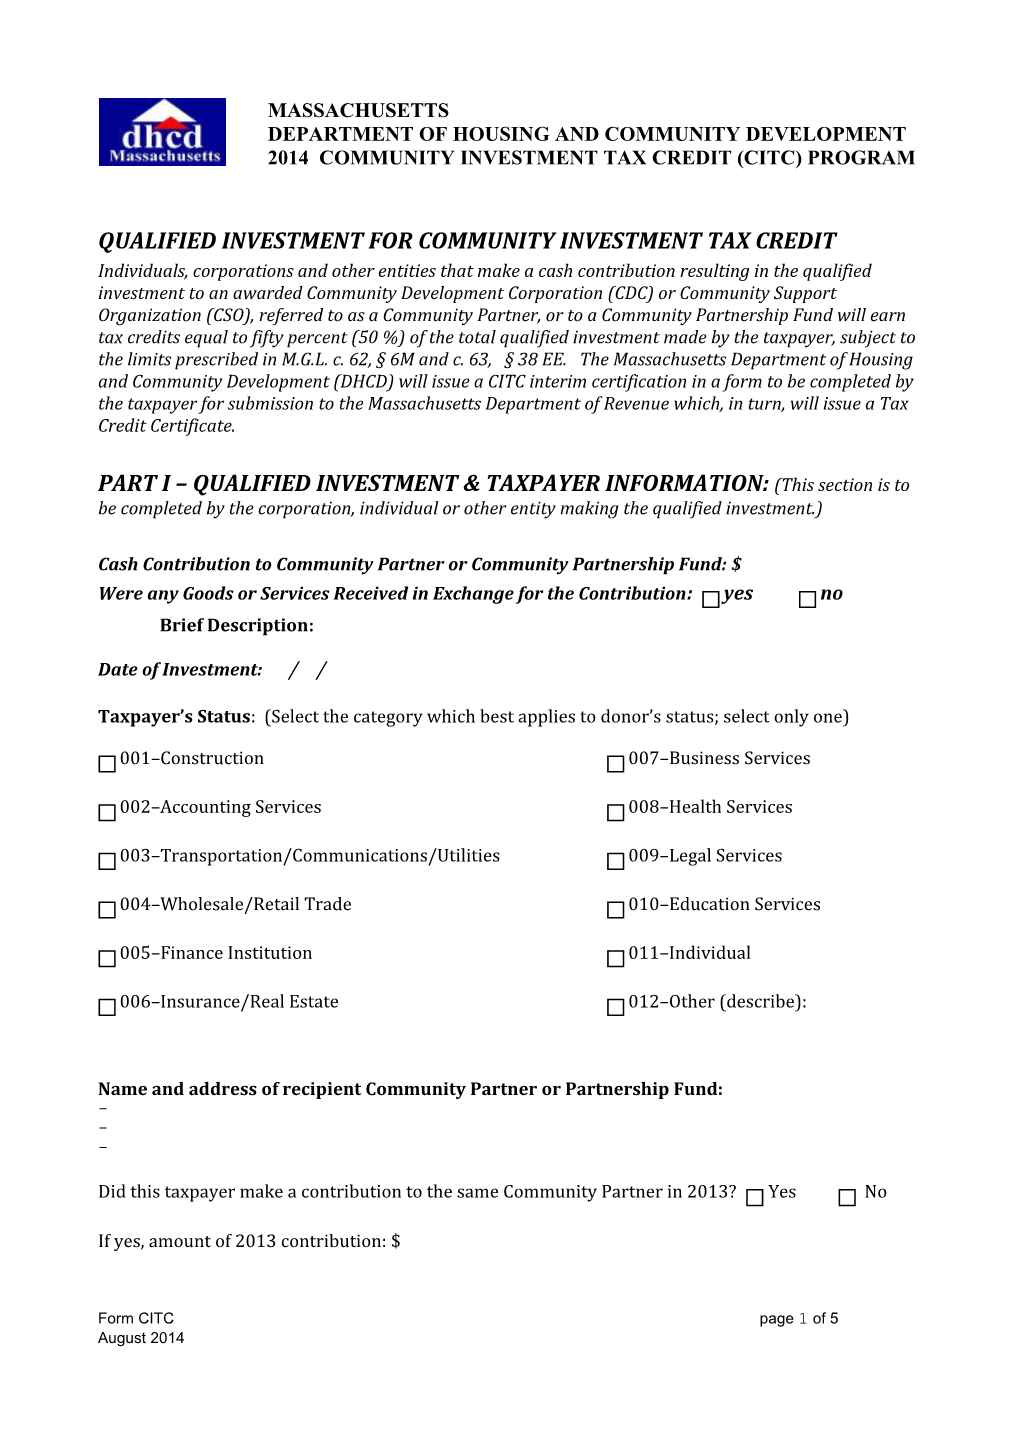 Qualified Investment for Community Investment Tax Credit